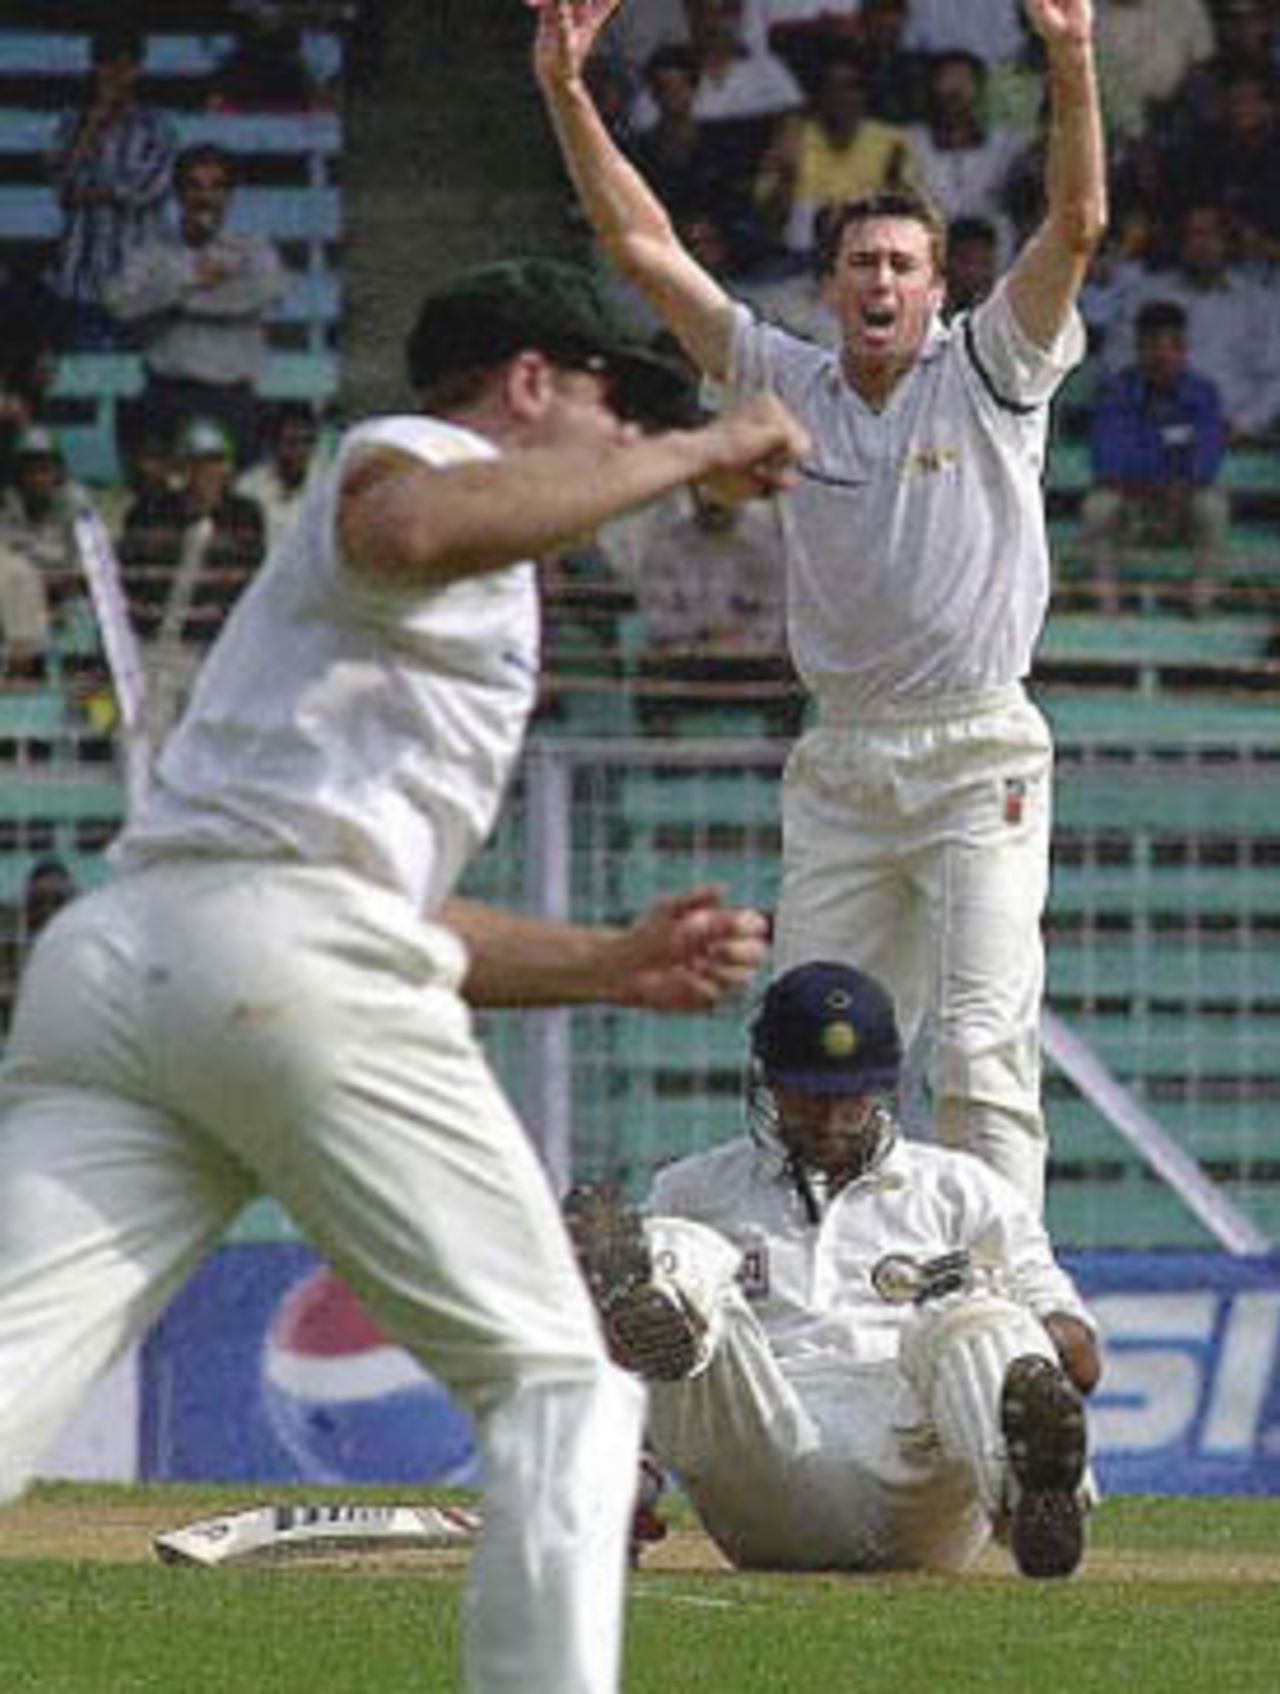 Australian pace bowler Glenn McGrath (R-top) celebrates after claiming the wicket of fallen Indian batsman Sadagopan Ramesh (R-bottom) on the opening day of the first Test match between India and Australia at Wankhade stadium in Bombay, 27 February 2001. Australia turned the screws on India at the start of the Test, reducing the hosts to 62 for 4 by lunch. Player at L is unidentified.